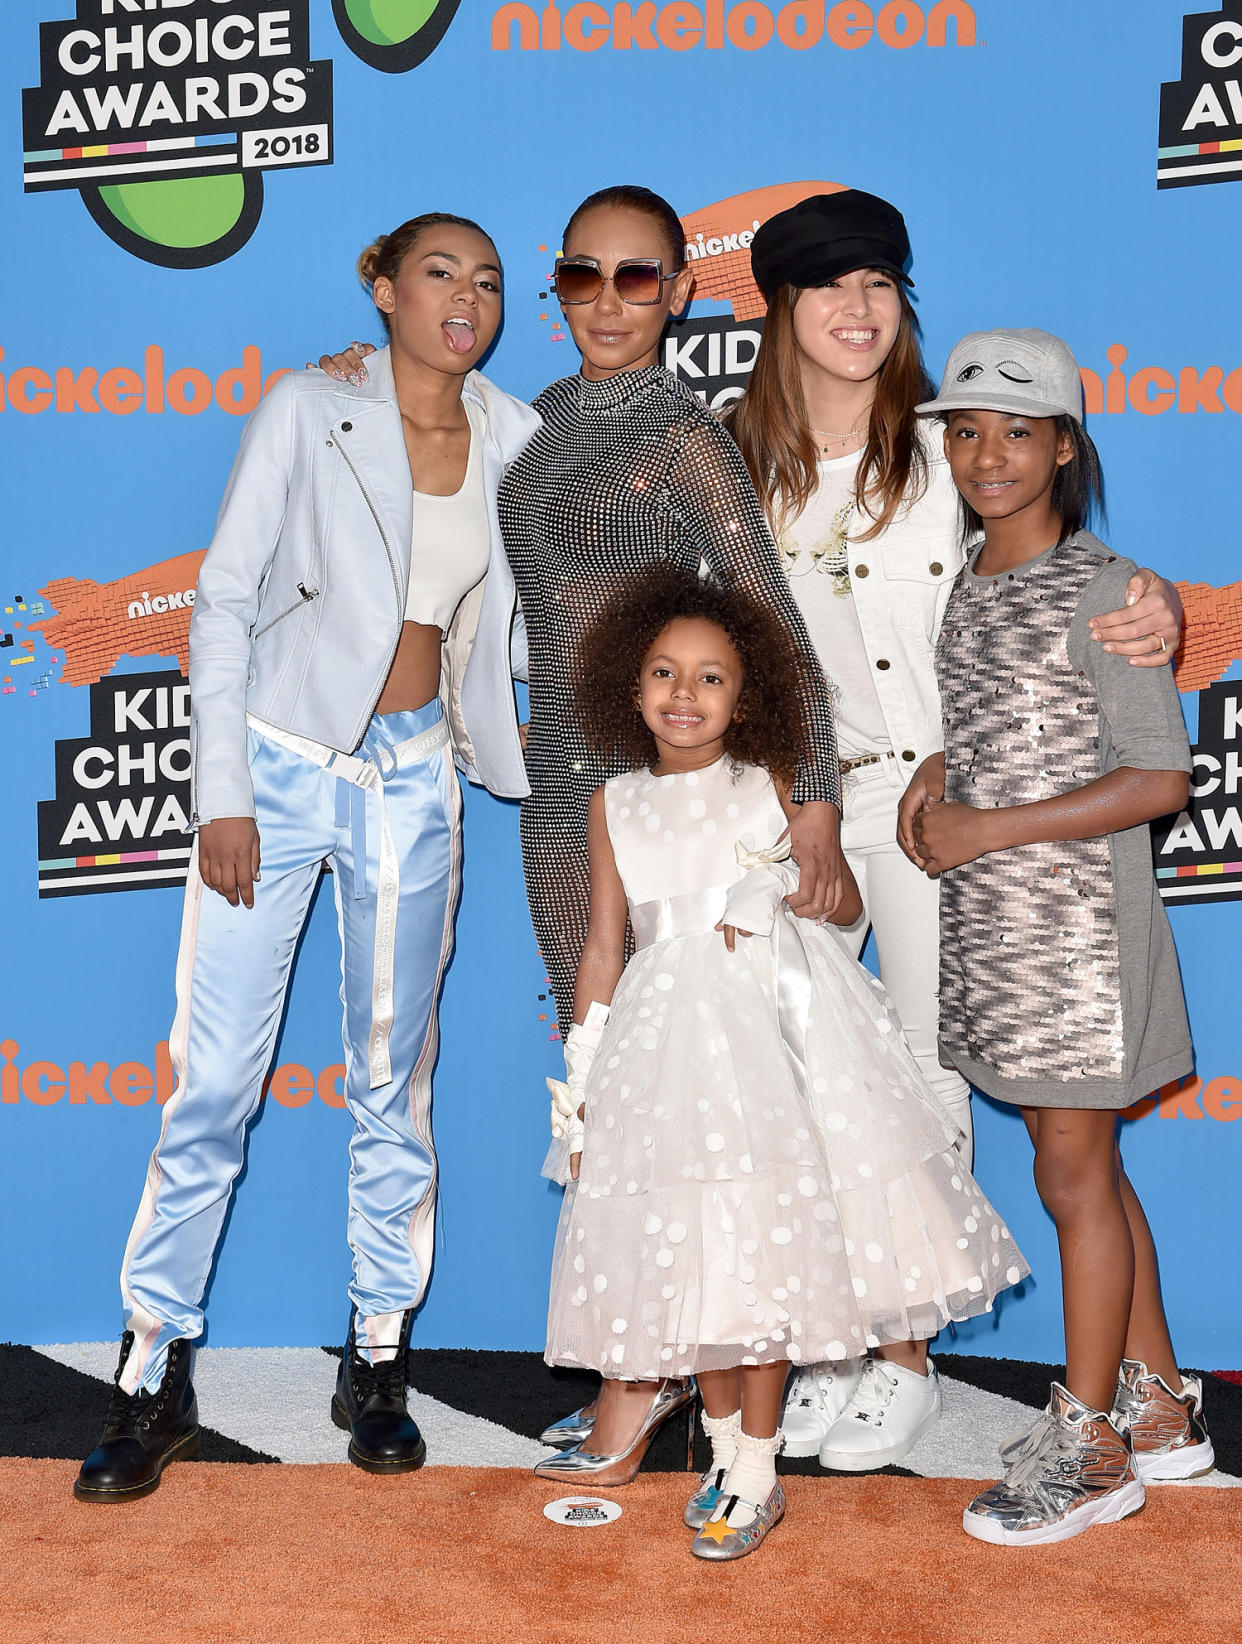 Phoenix Chi Gulzar, Mel B, Madison Brown Belafonte, Giselle Belafonte, and Angel Iris Murphy Brown attend Nickelodeon's 2018 Kids' Choice Awards at The Forum on March 24, 2018 in Inglewood, California. (Axelle/Bauer-Griffin / FilmMagic)